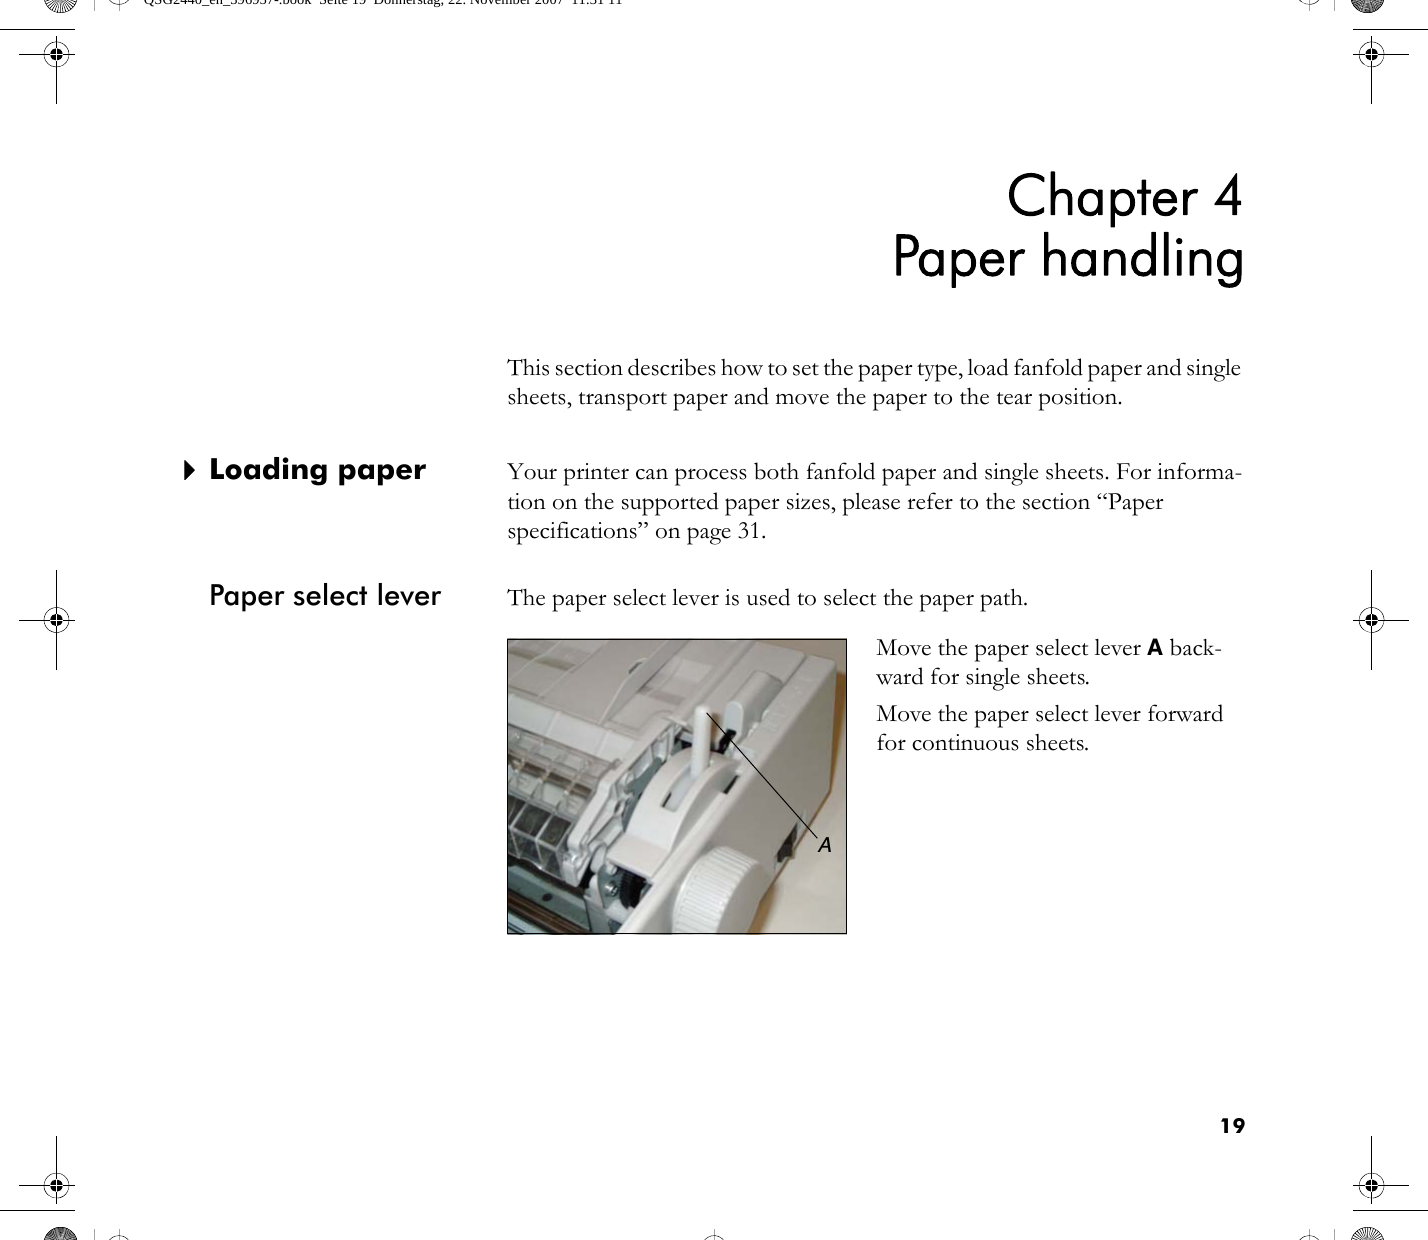 19Chapter 4Paper handlingThis section describes how to set the paper type, load fanfold paper and single sheets, transport paper and move the paper to the tear position.`Loading paper Your printer can process both fanfold paper and single sheets. For informa-tion on the supported paper sizes, please refer to the section “Paper specifications” on page 31.Paper select lever The paper select lever is used to select the paper path.Move the paper select lever A back-ward for single sheets.Move the paper select lever forward for continuous sheets.AQSG2440_en_396957-.book  Seite 19  Donnerstag, 22. November 2007  11:31 11